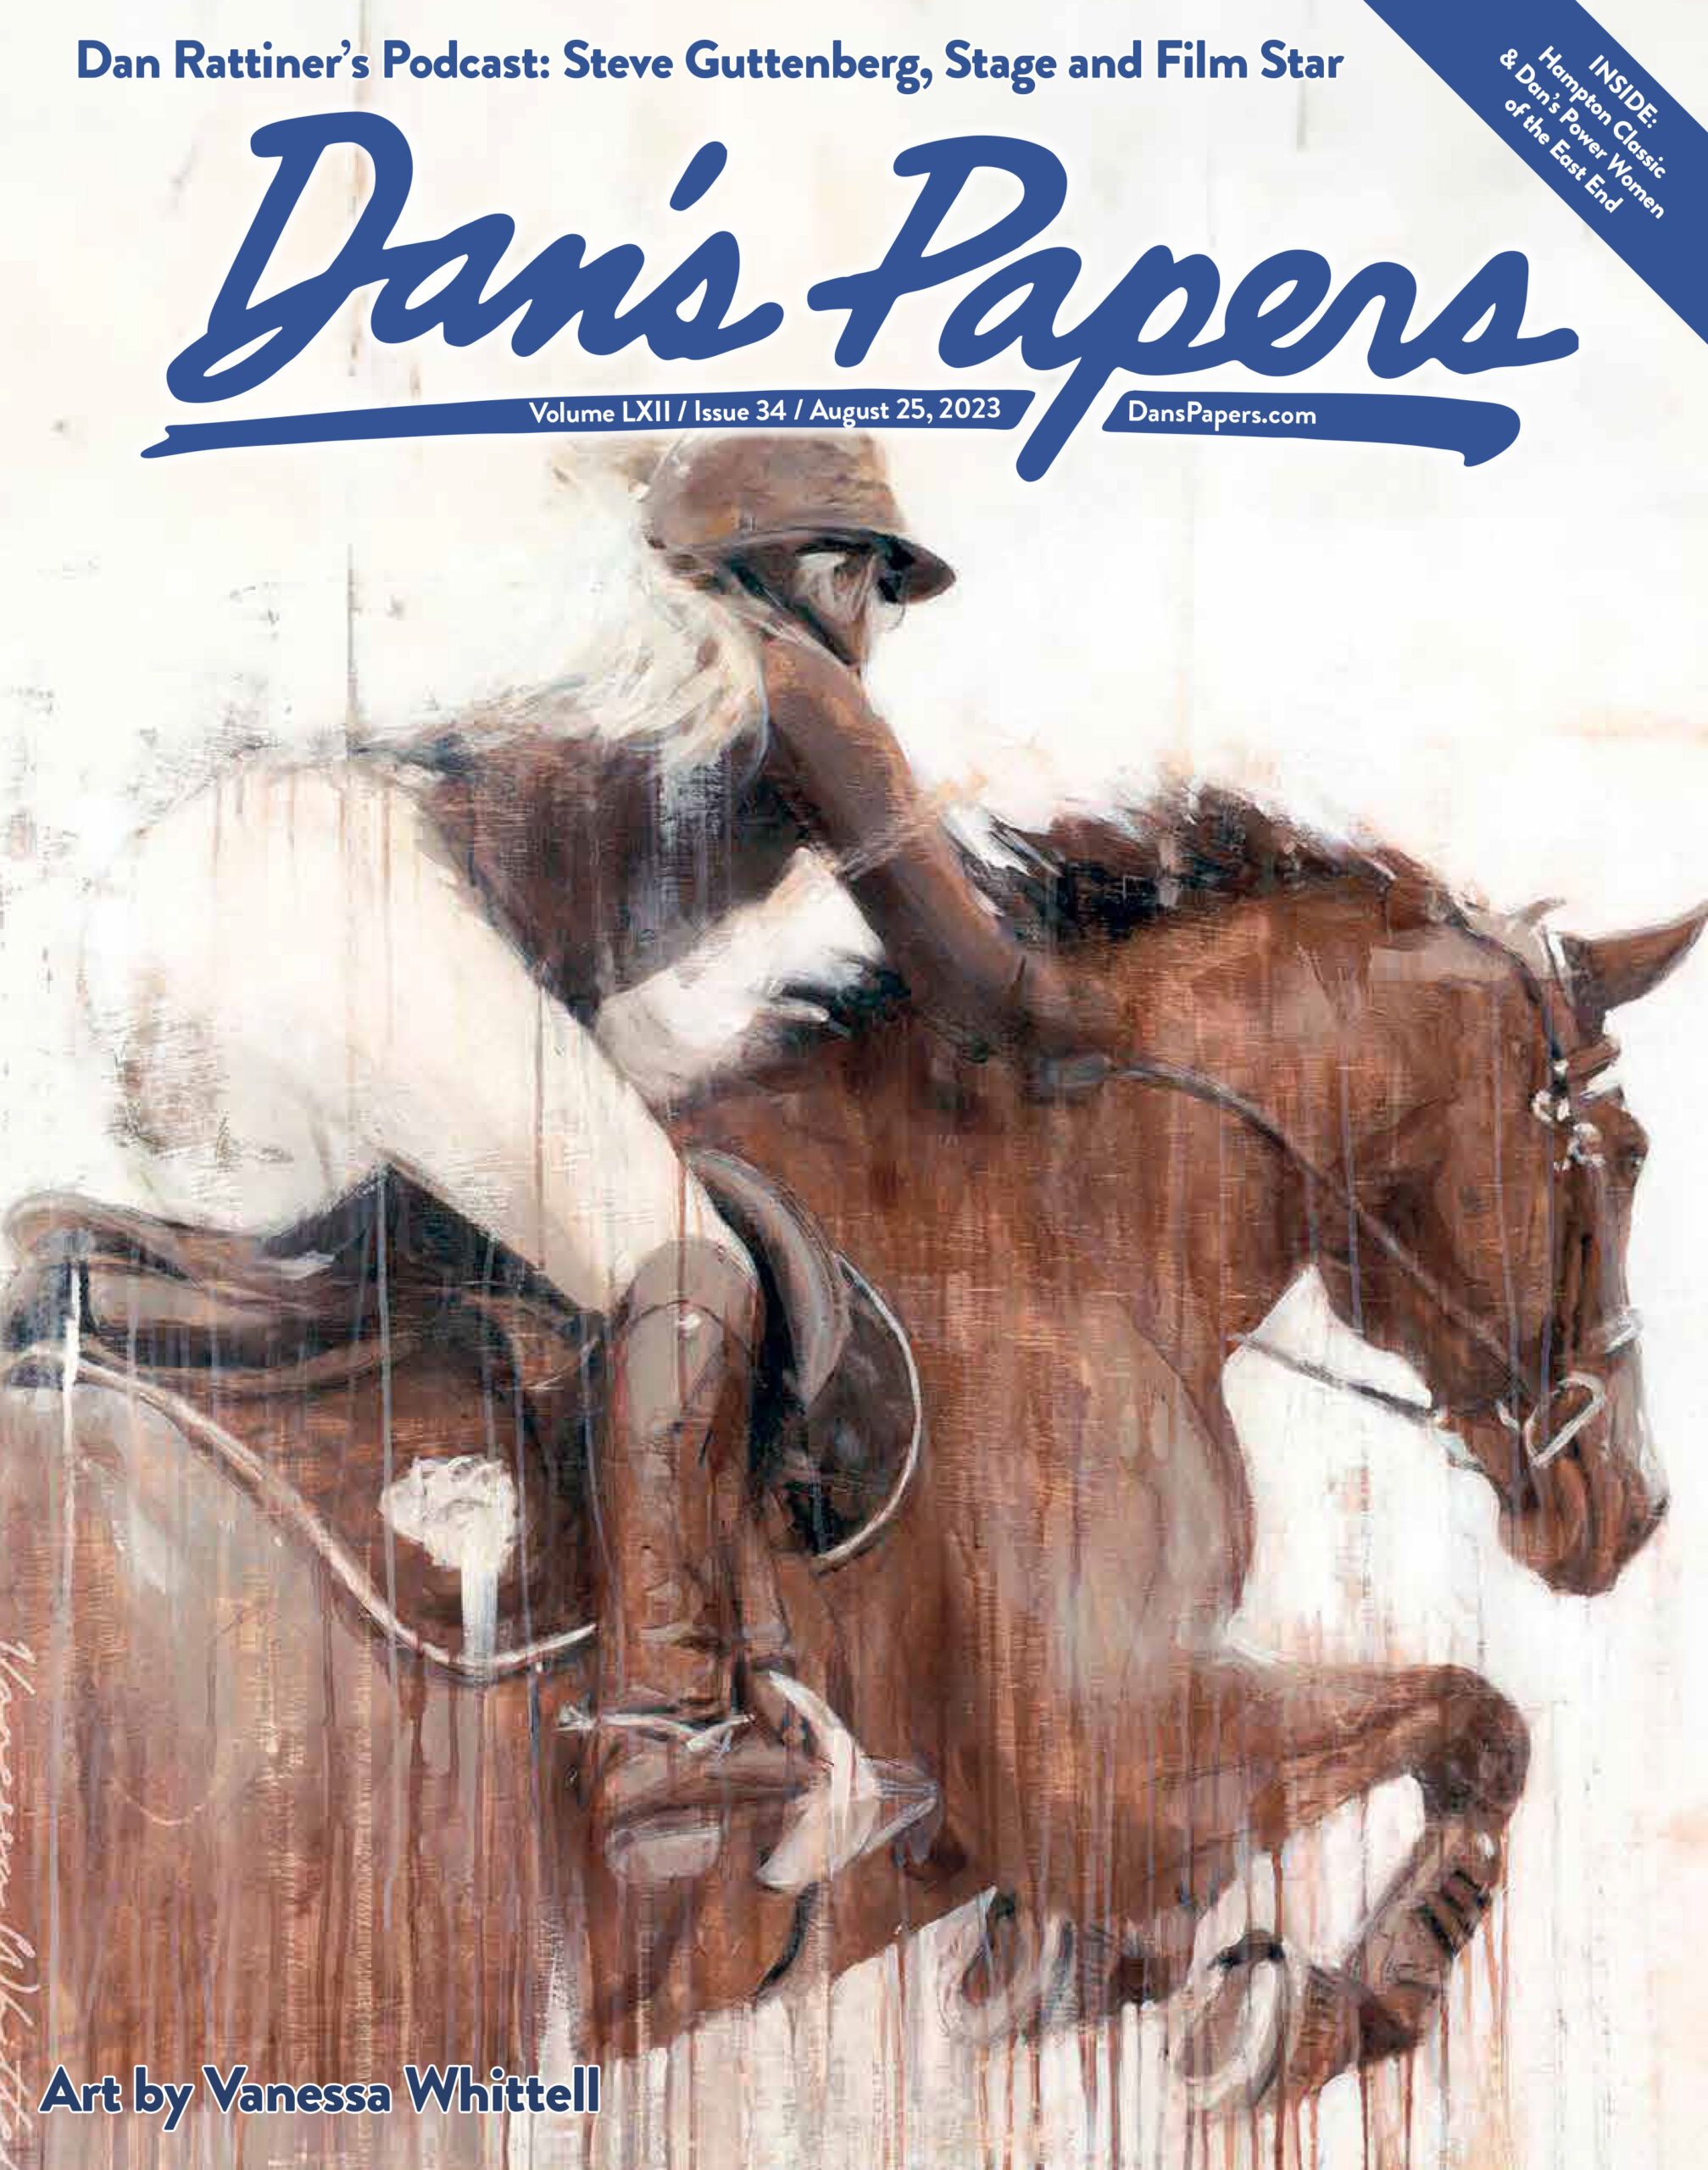 August 25, 2023 Dan's Papers cover art featuring the 2023 Hampton Classic poster by Vanessa Whittell